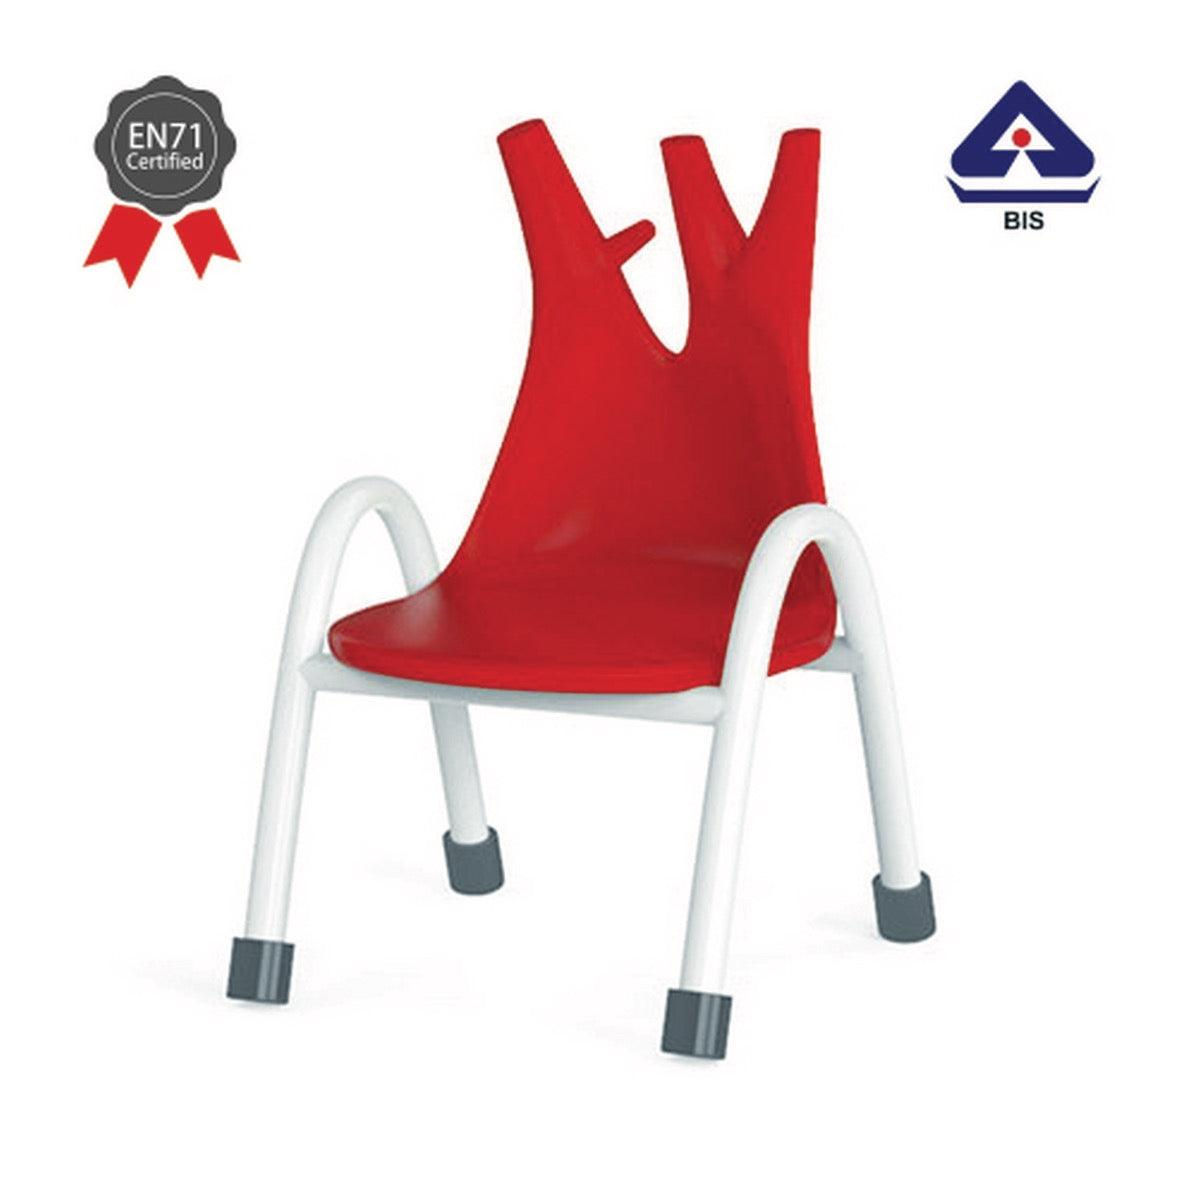 Ok Play Trunk Chair, Study Chair, Sturdy And Durable Chair, Plastic Chair, Perfect For Home, Creches And School, Red, 2 to 4 Years, Height 8 Inches